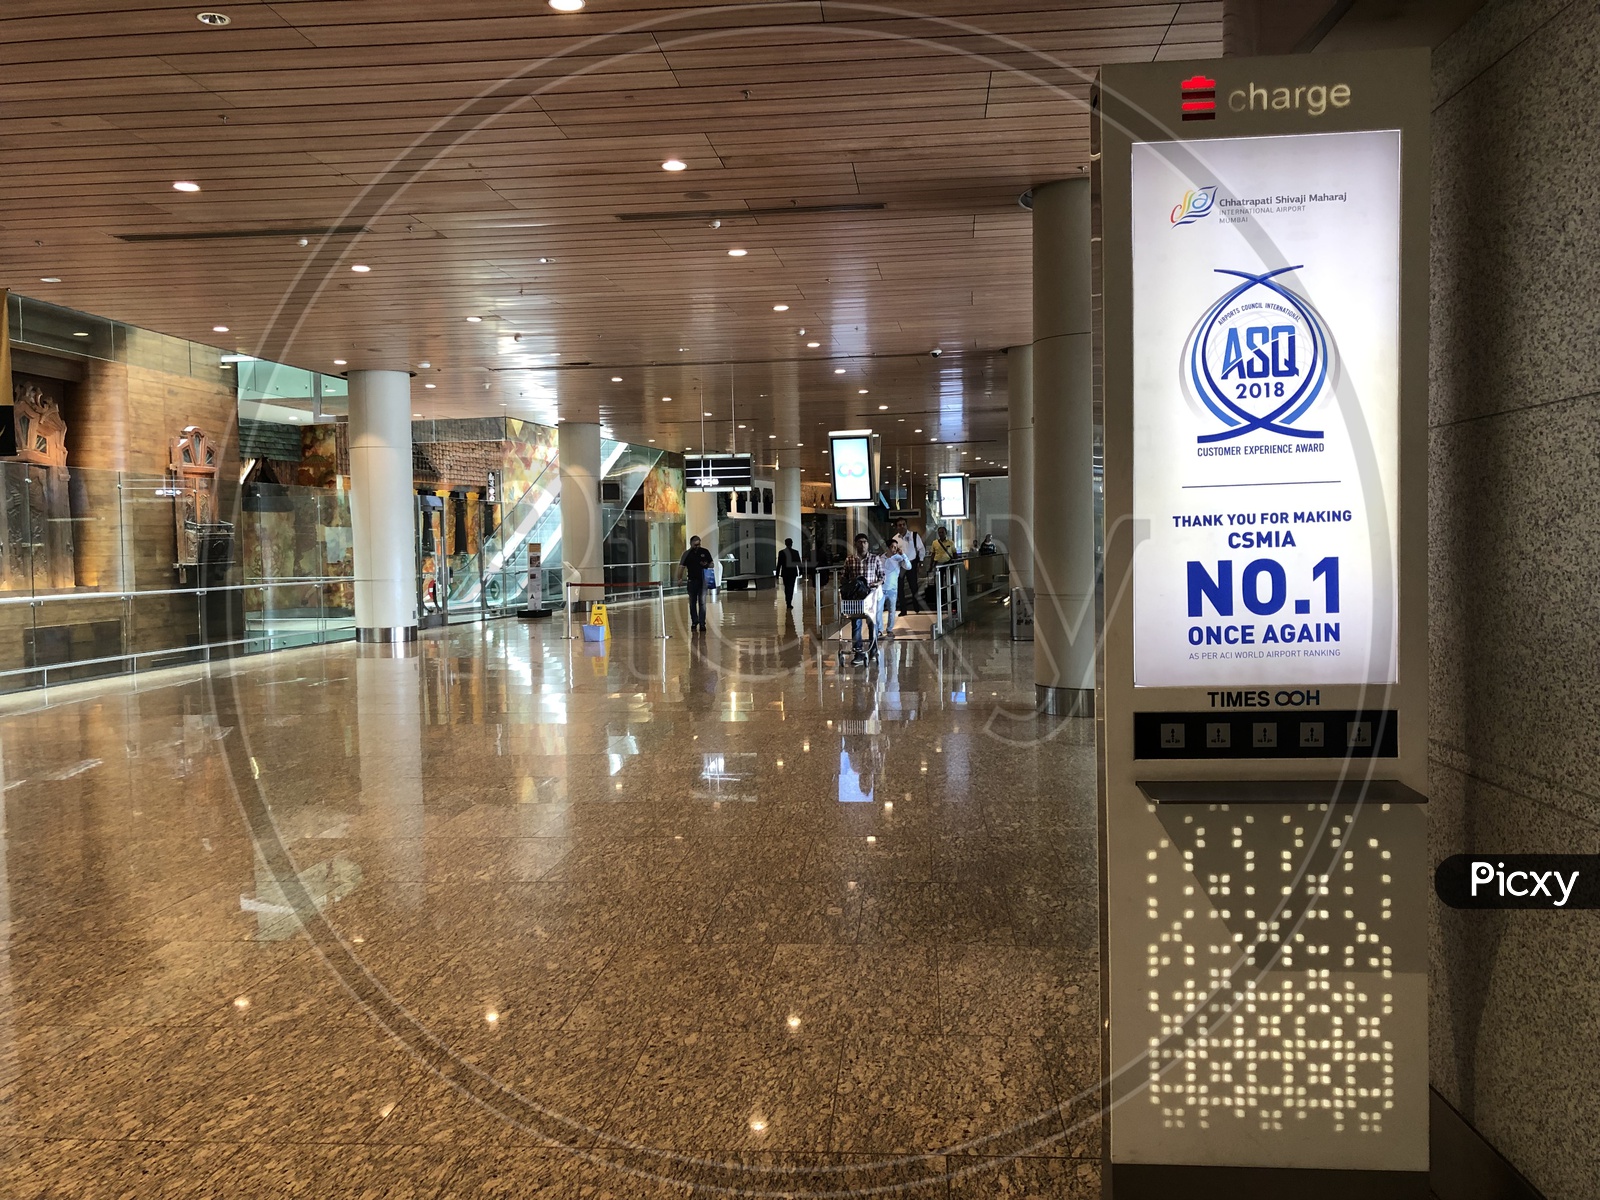 Mobile Charging Kiosks At Airports